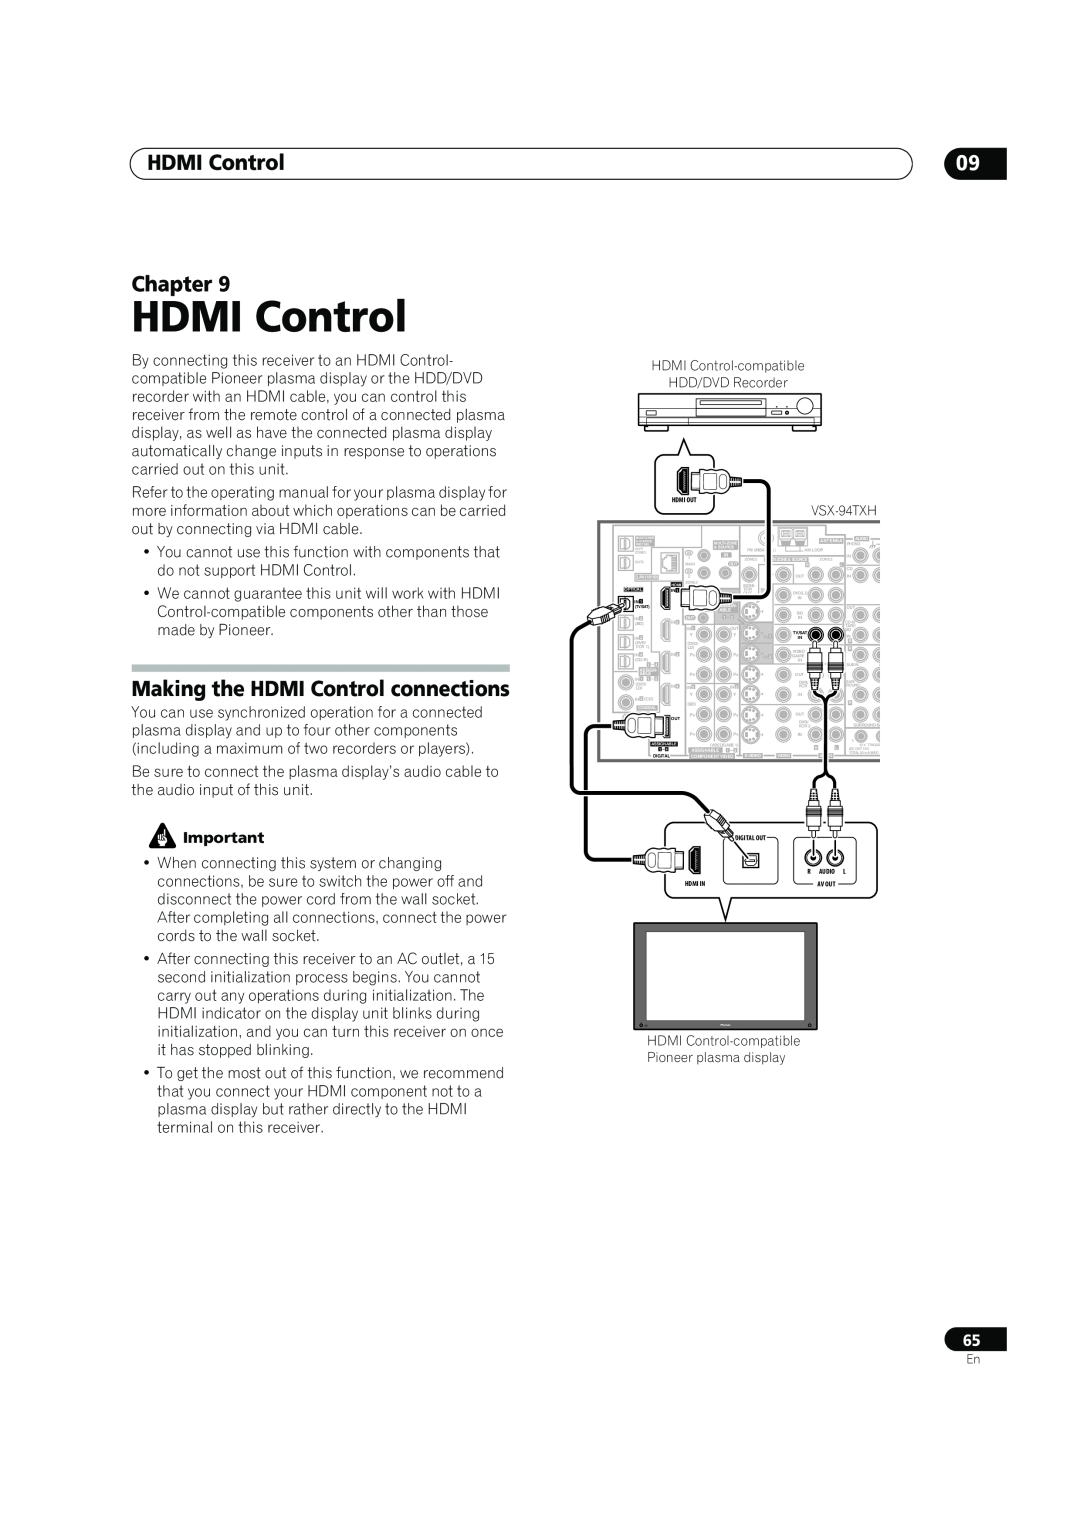 DreamGEAR VSX-92TXH, VSX-94TXH operating instructions HDMI Control Chapter, Making the HDMI Control connections 